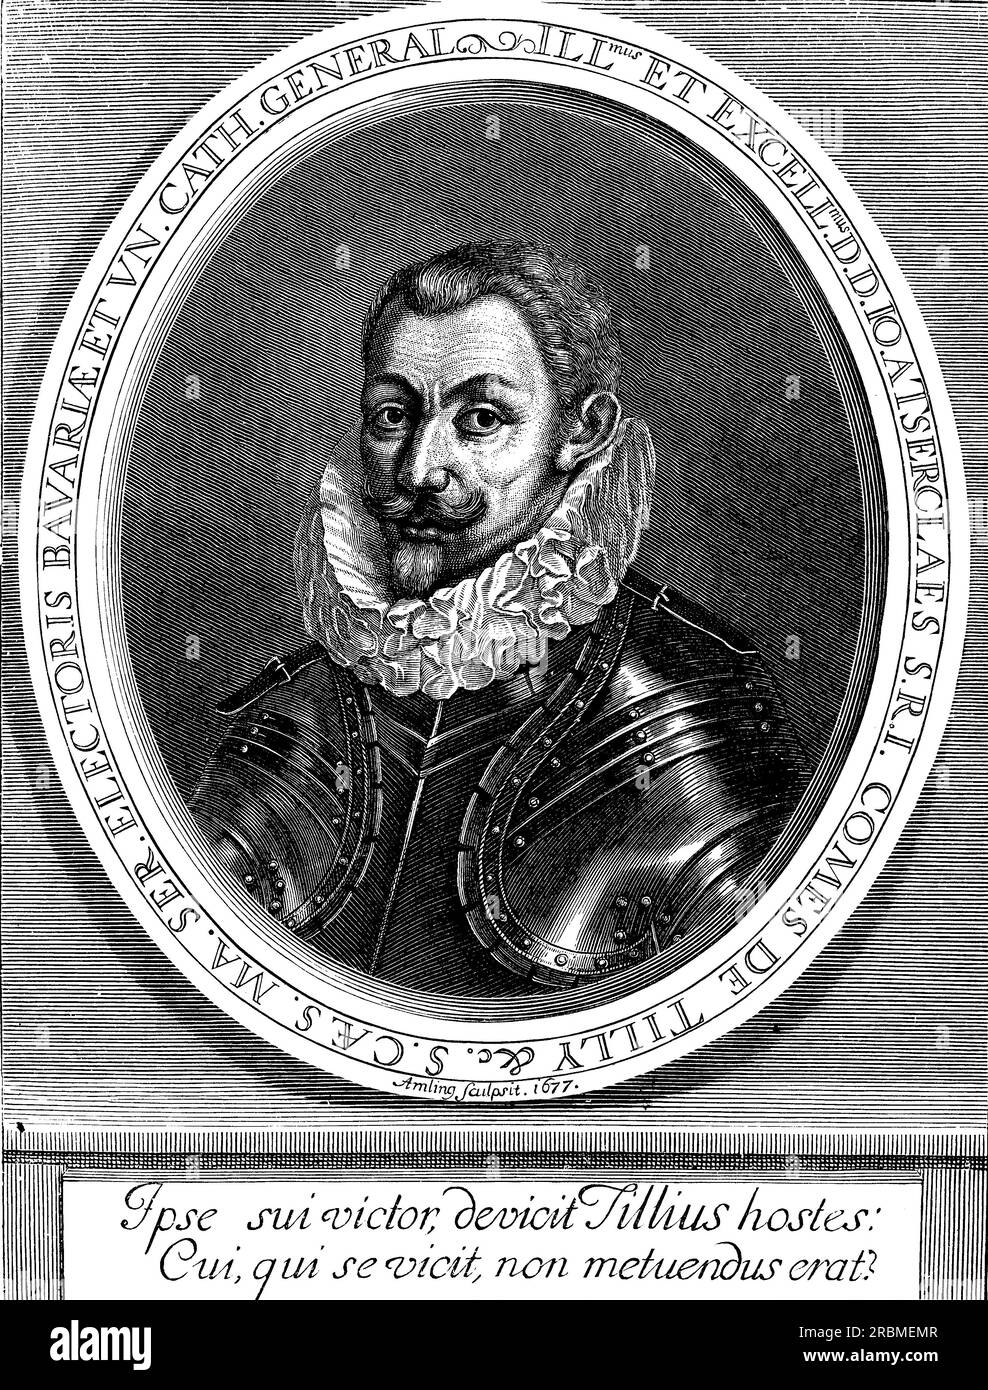 Portrait of Johann Tserclaes, Count of Tilly field marshal, chief commander of the Holy Roman Empire’s forces in the Thirty Years' War,commander of the Catholic League's with important victories against the Protestants as the sack of the Protestant city of Magdeburg.Defeated at Breitenfeld in 1631 by the Swedish army of King Gustavus Adolphus. Stock Photo